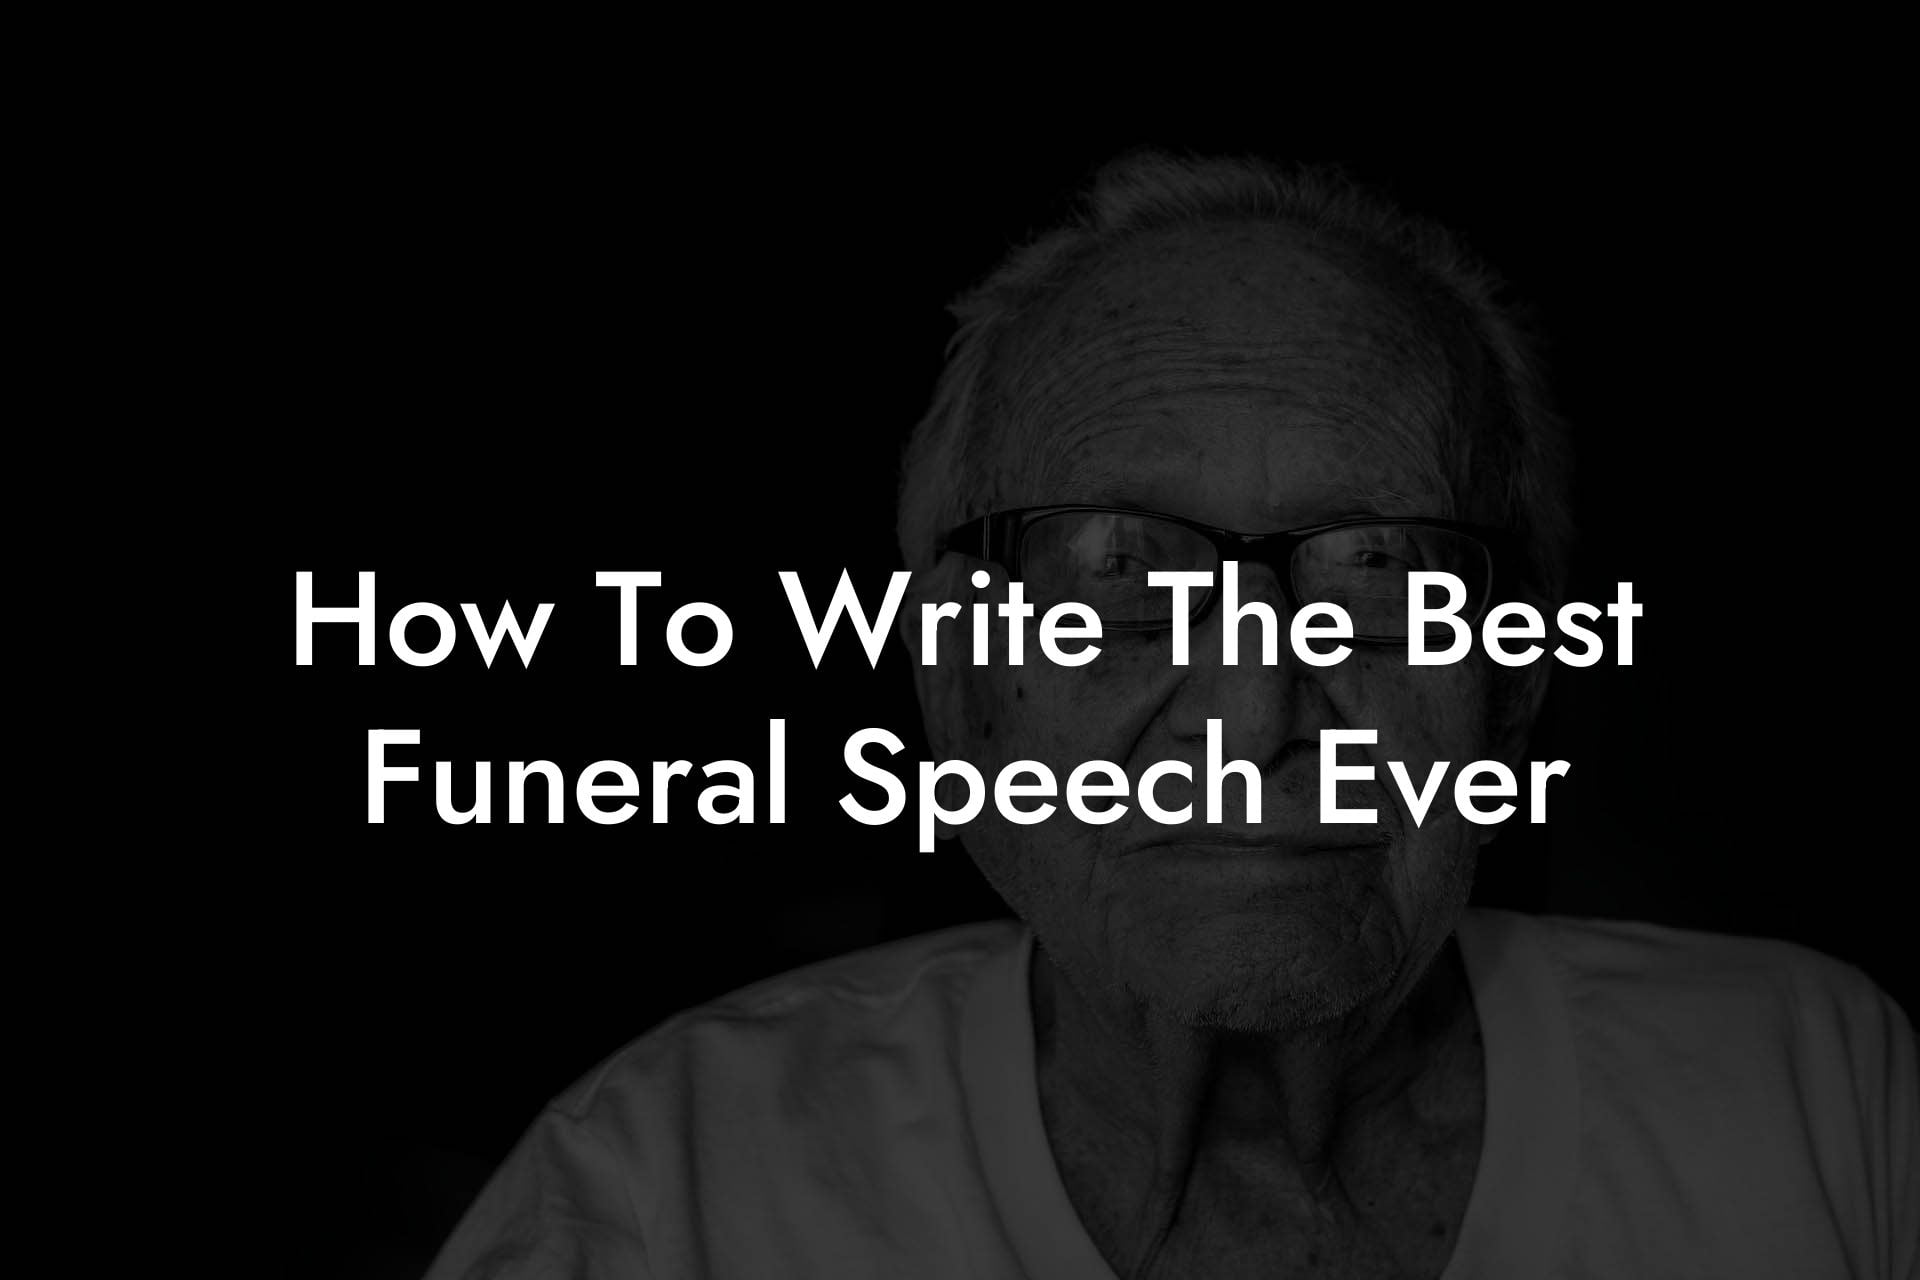 How To Write The Best Funeral Speech Ever